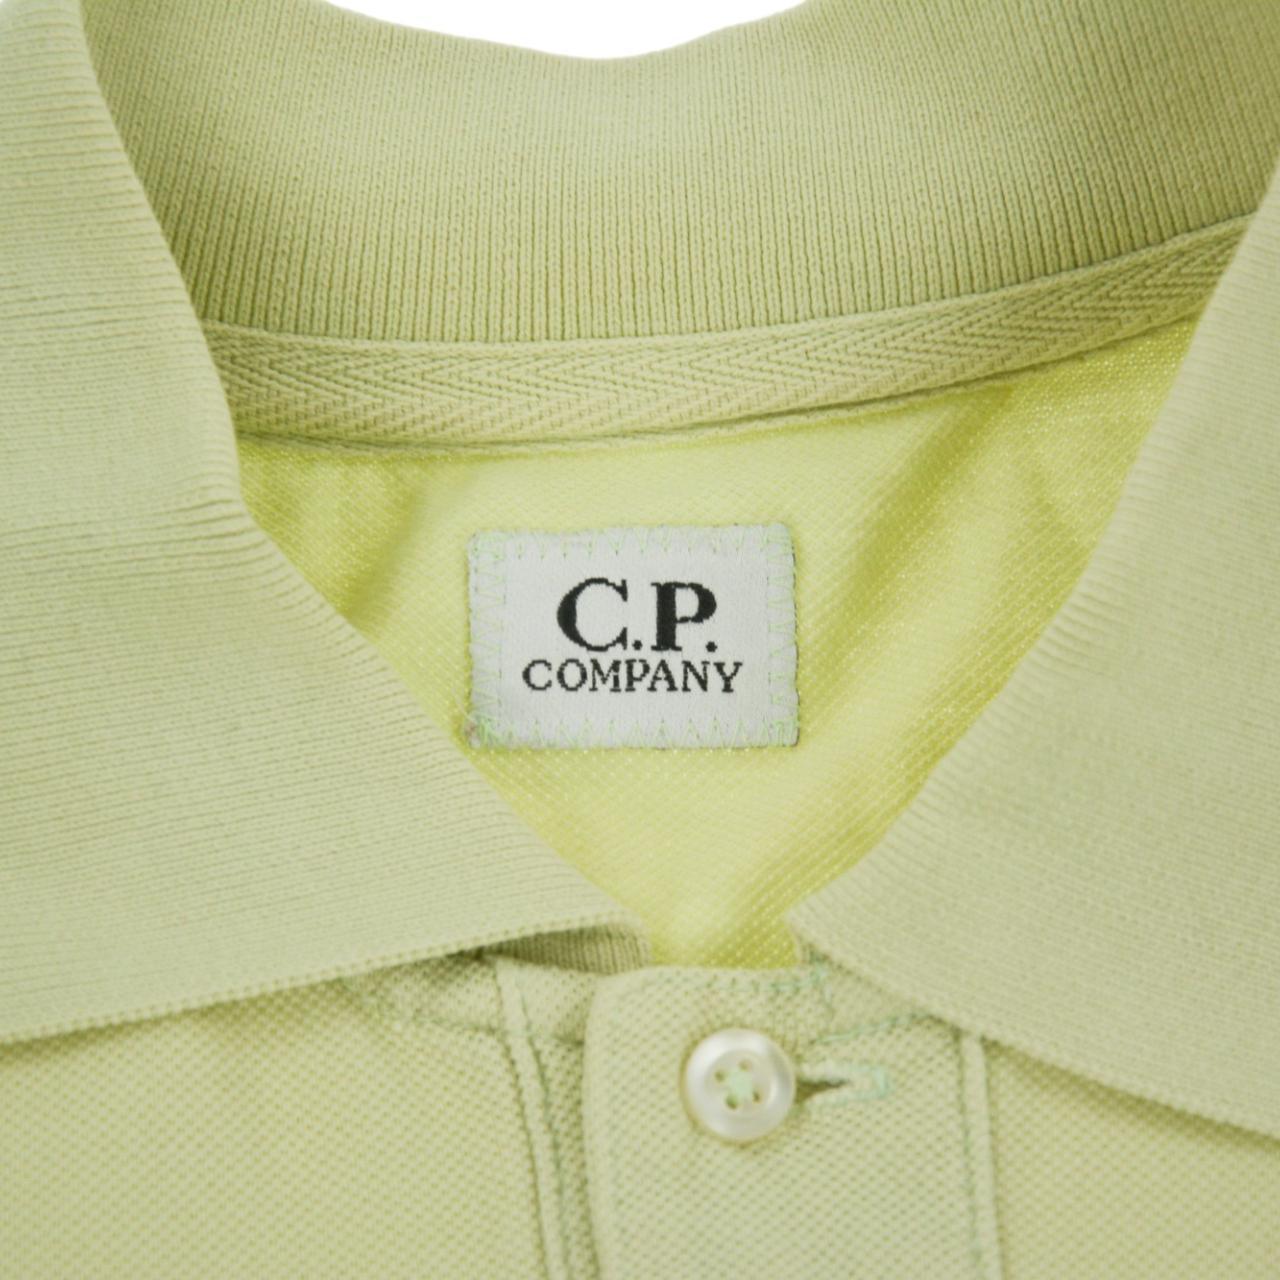 Vintage CP Company Polo Shirt Size M - Known Source